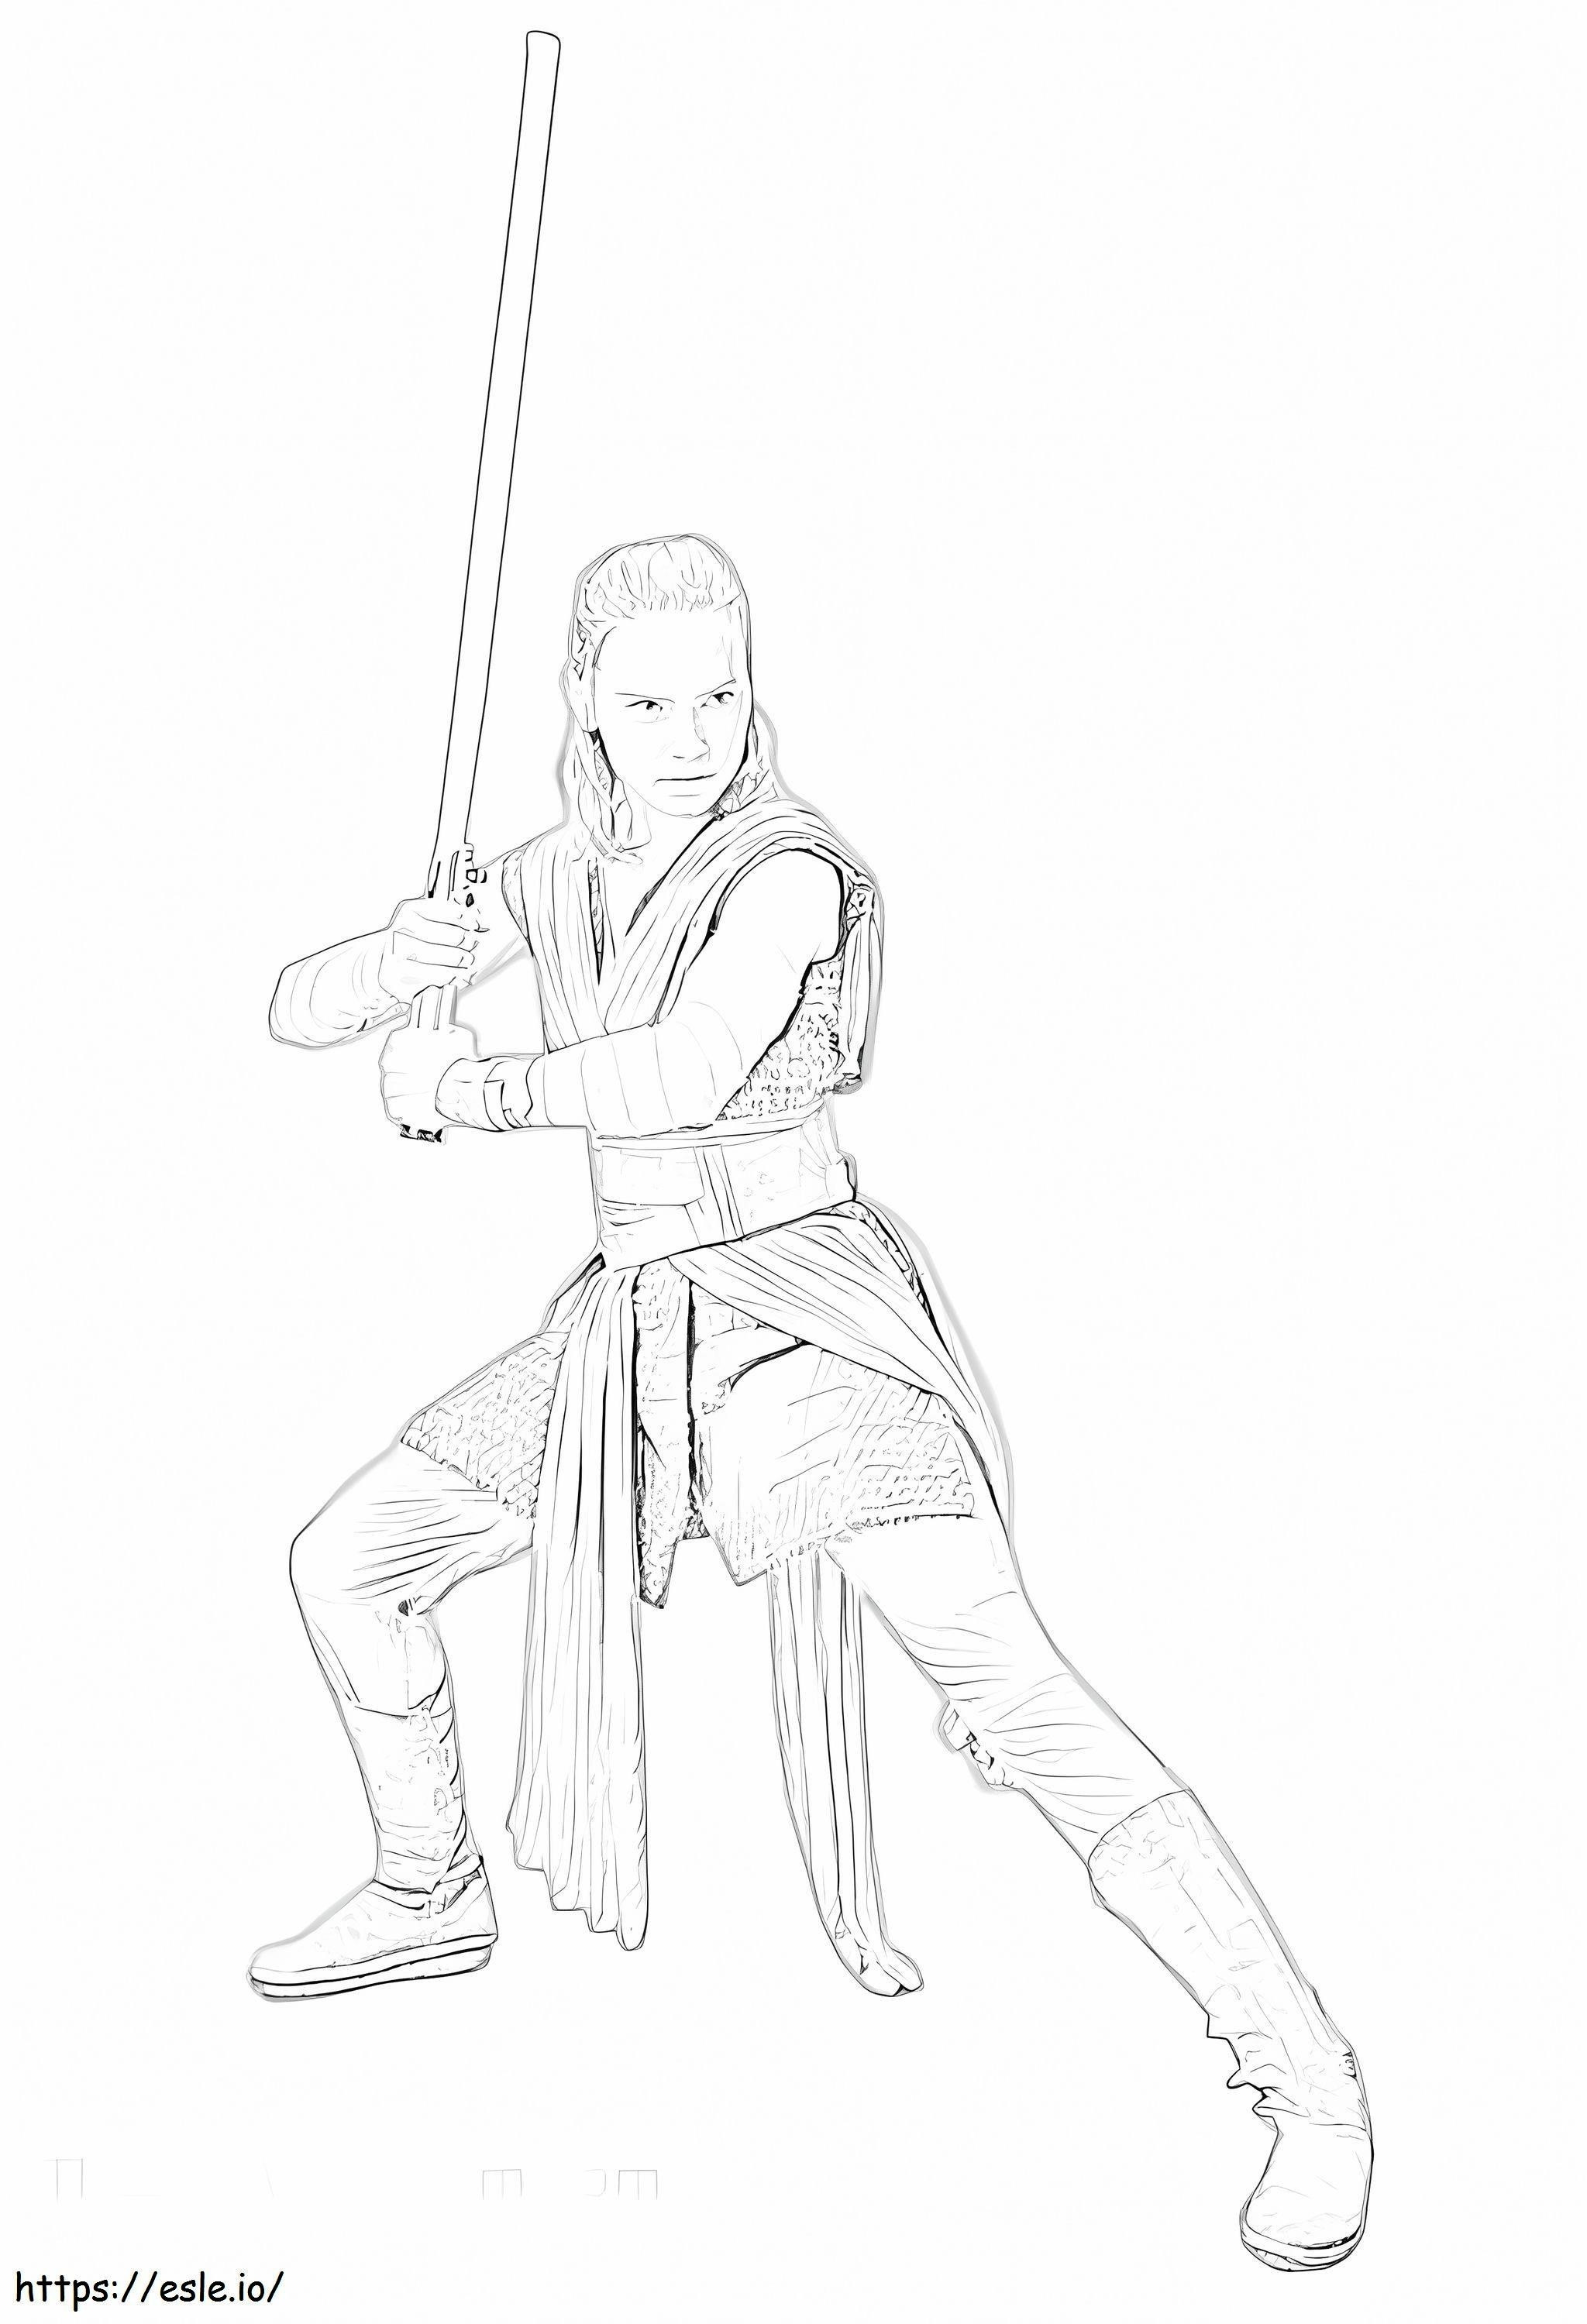 Rey Holding Lightsaber coloring page